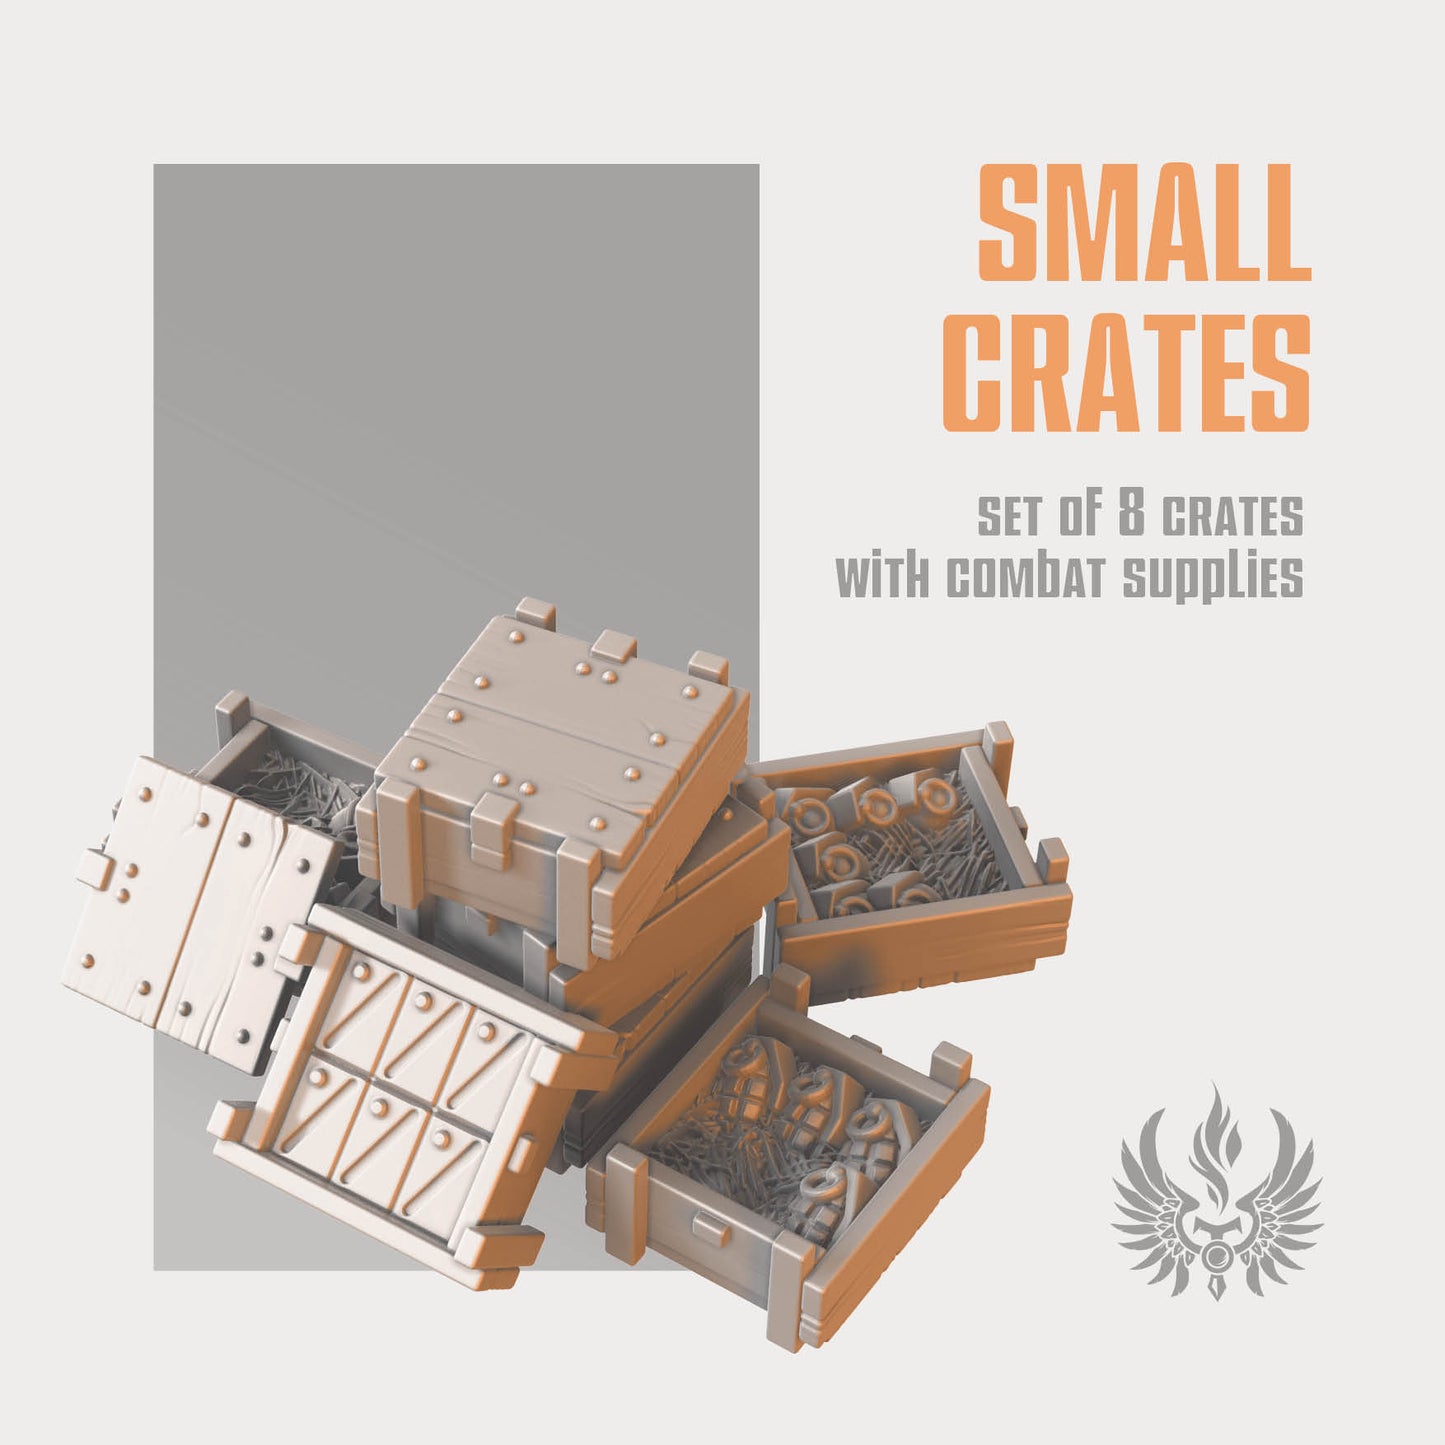 Small crates